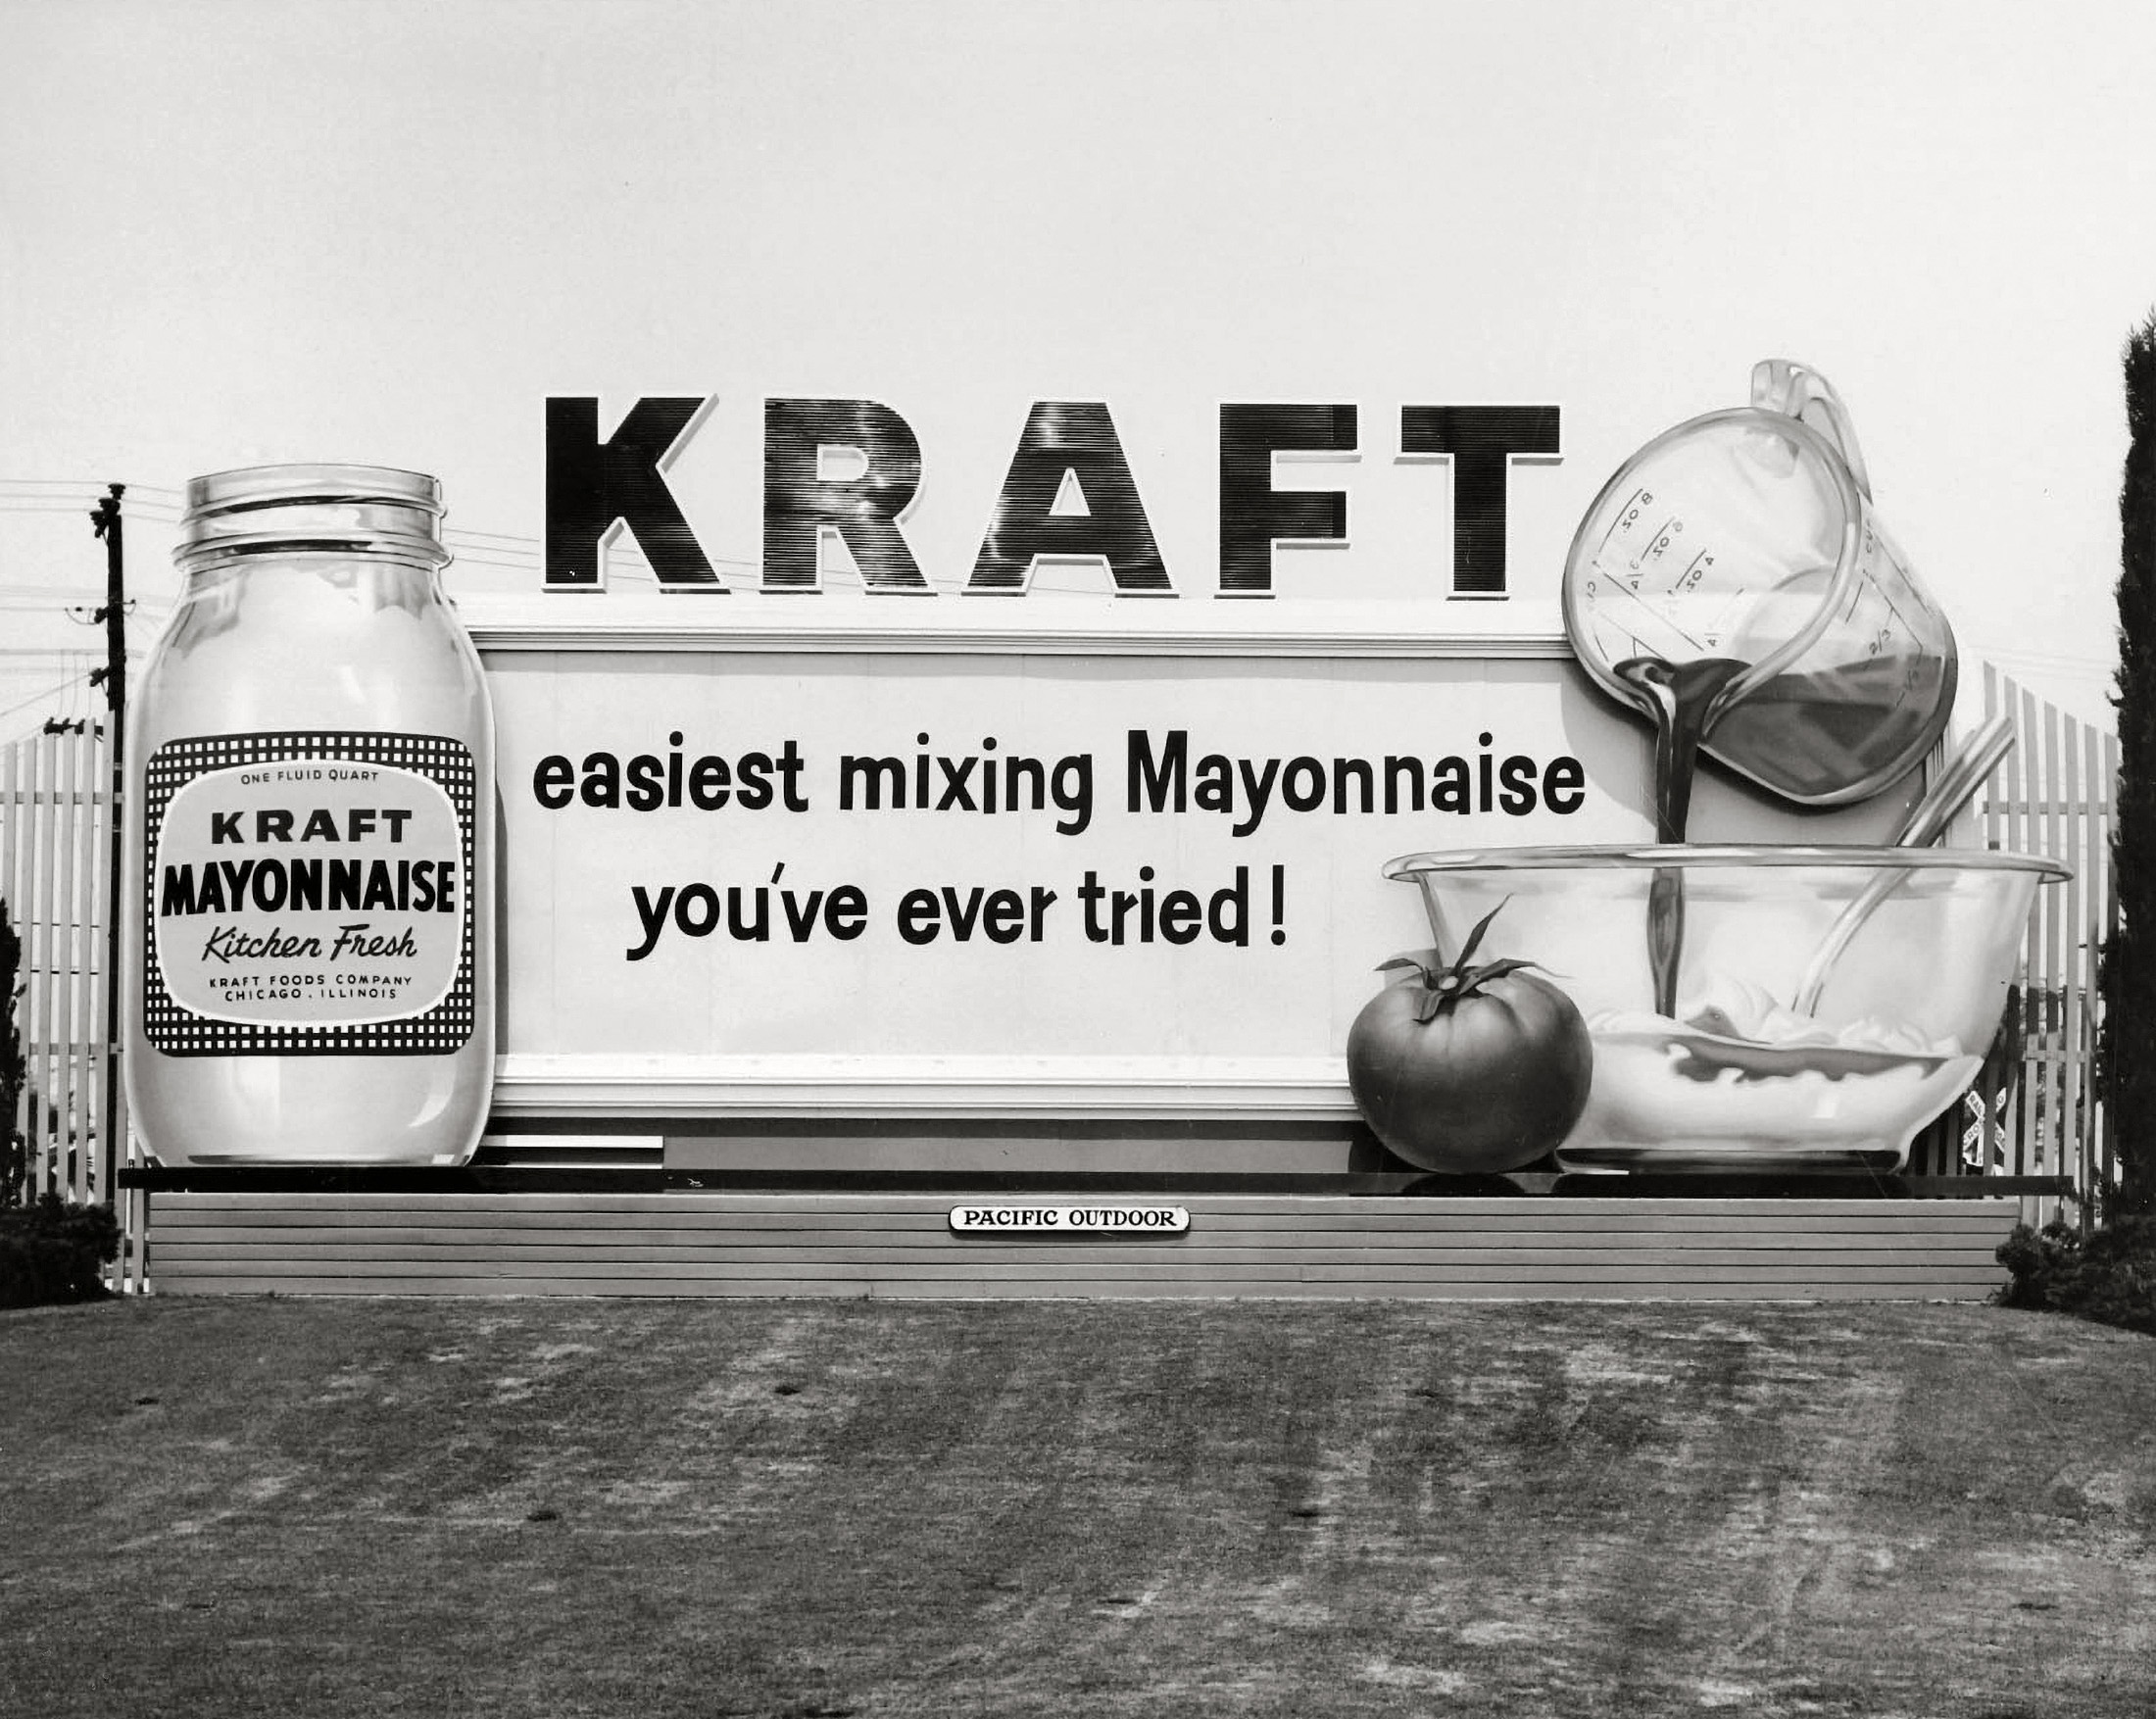 Los Angeles circa 1956. "KRAFT -- easiest mixing Mayonnaise you've ever tried!" No. 6 in a series of billboard photos from the files of Pacific Outdoor Advertising. View full size.